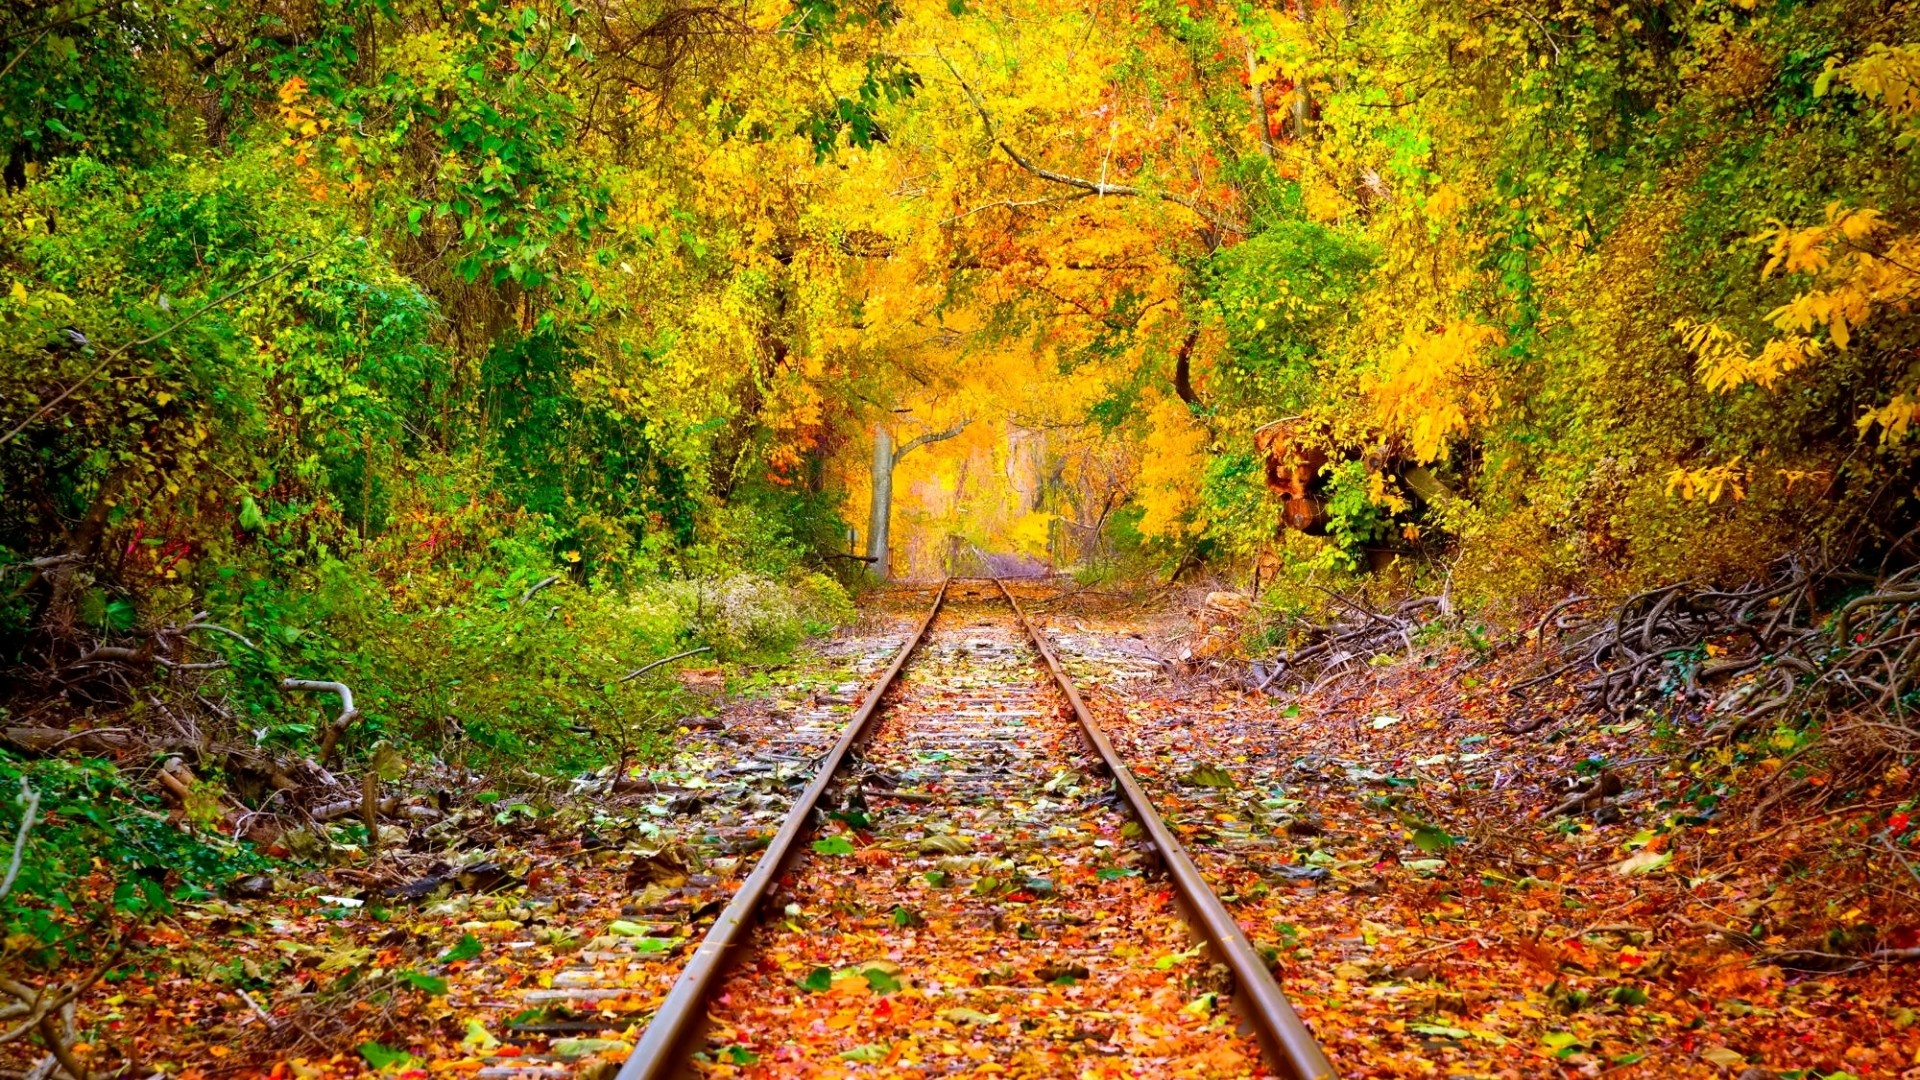 Download Wallpaper Early autumn in an abandoned railway